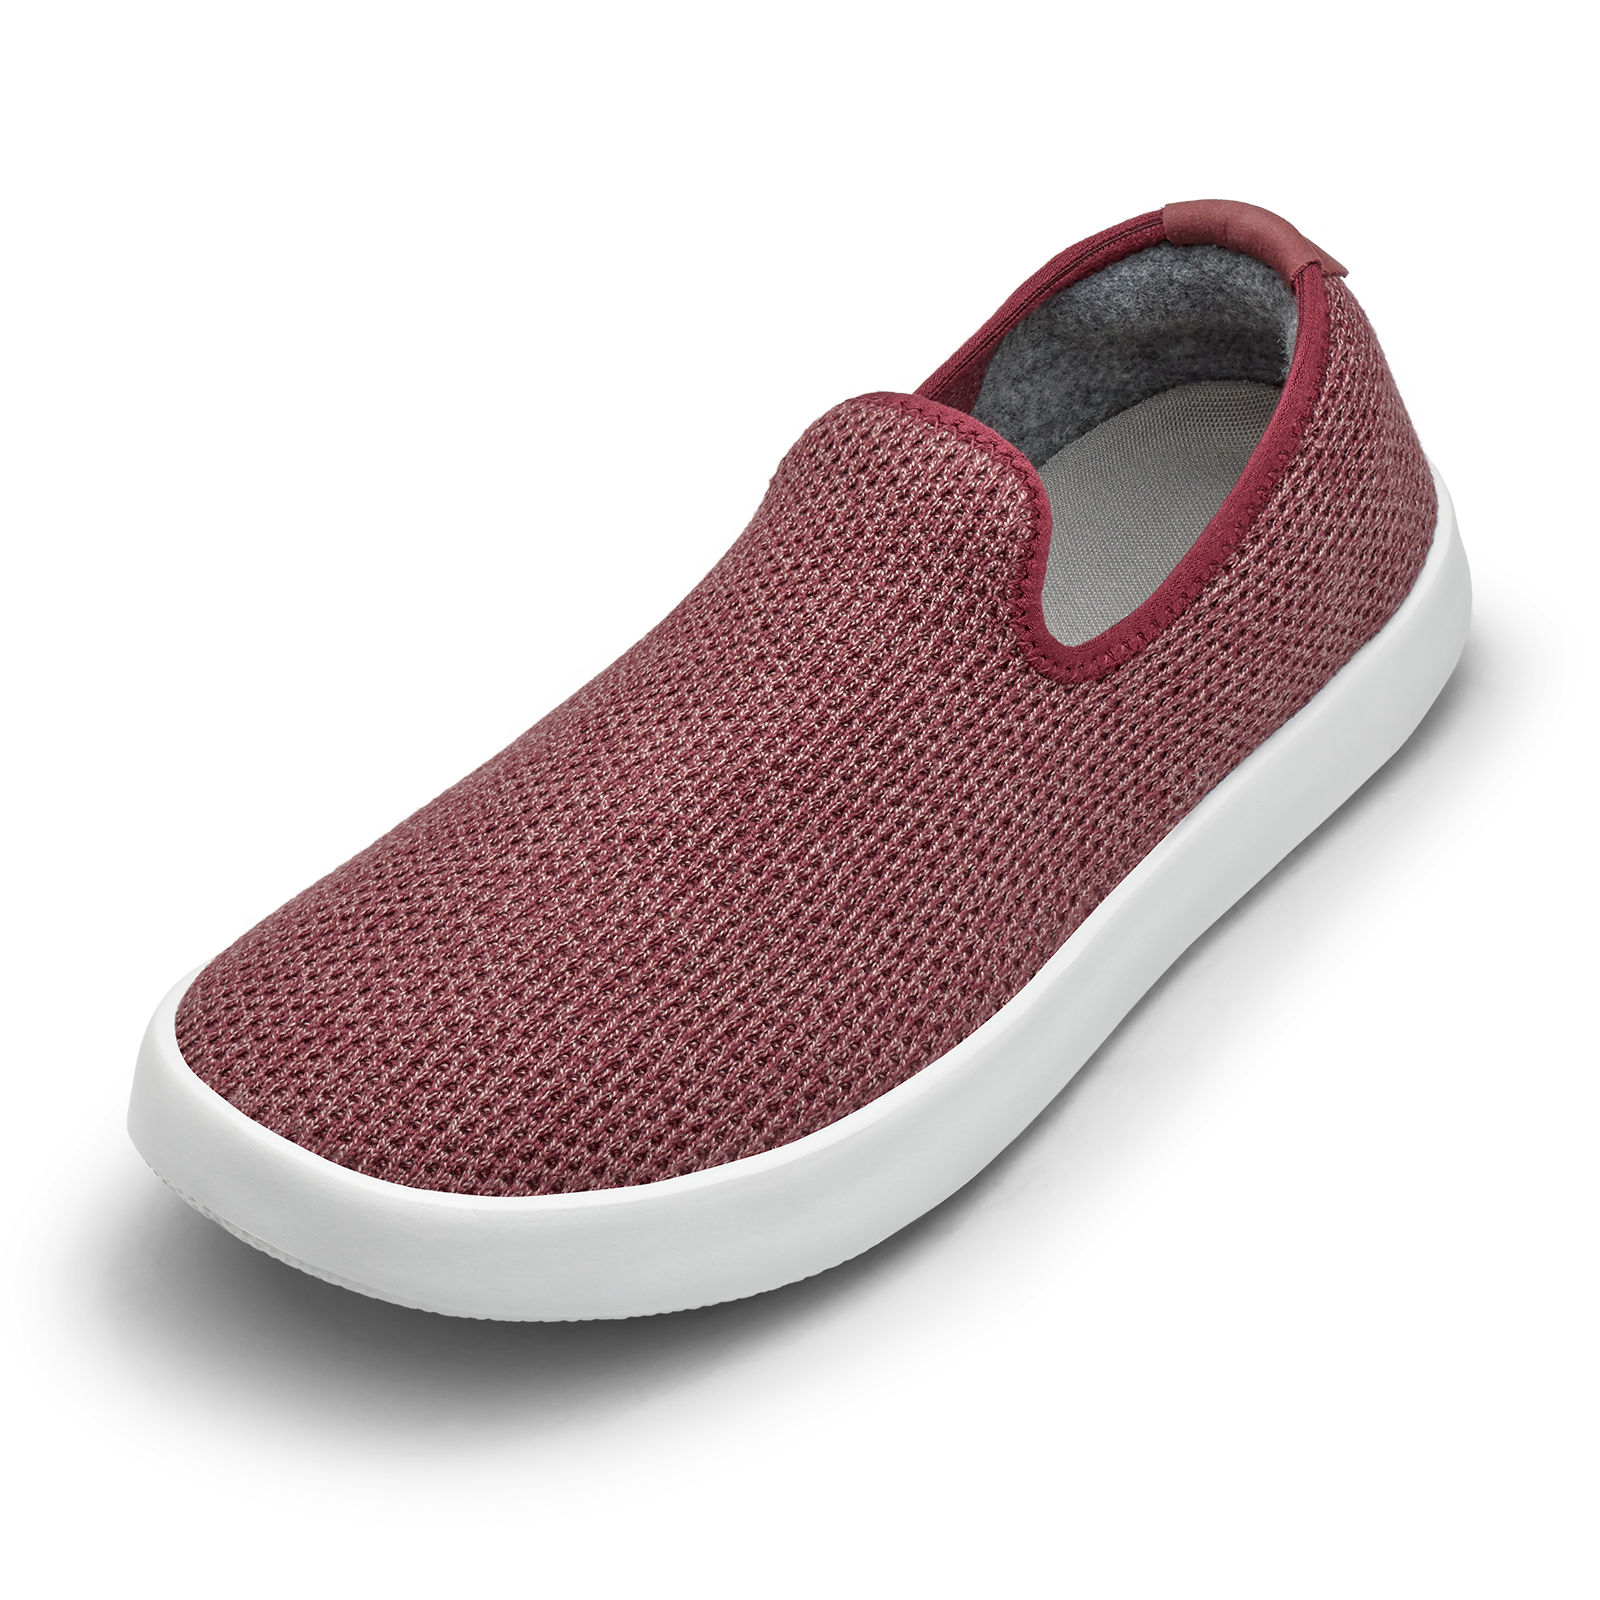 Men's Tree Loungers - Botanic Red (Blizzard Sole)